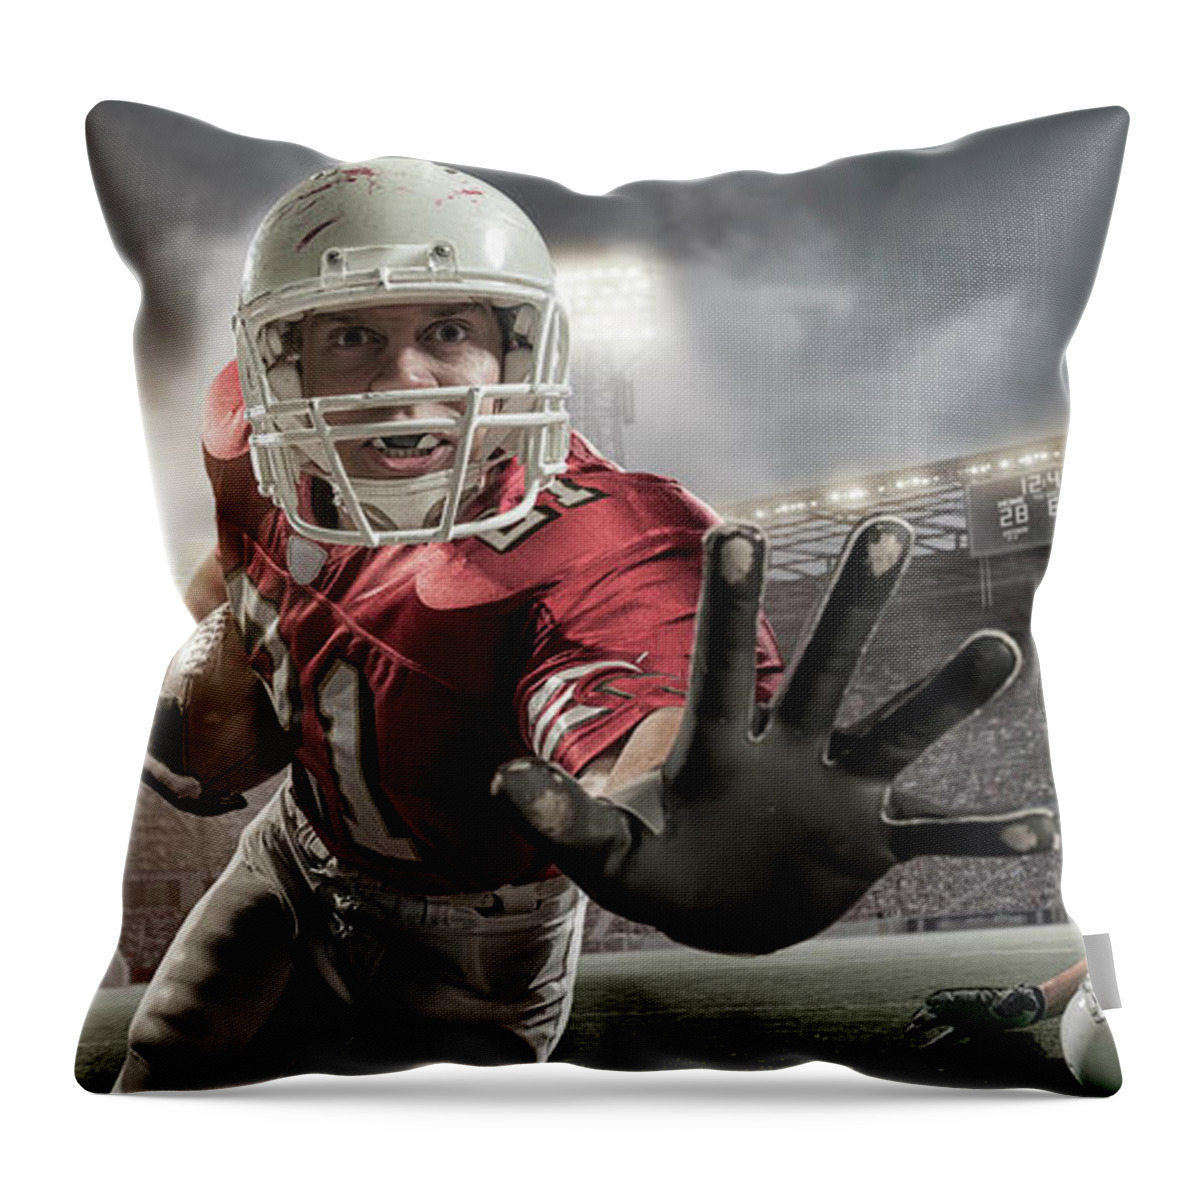 Soccer Uniform Throw Pillow featuring the photograph Close Up American Football Action by Peepo